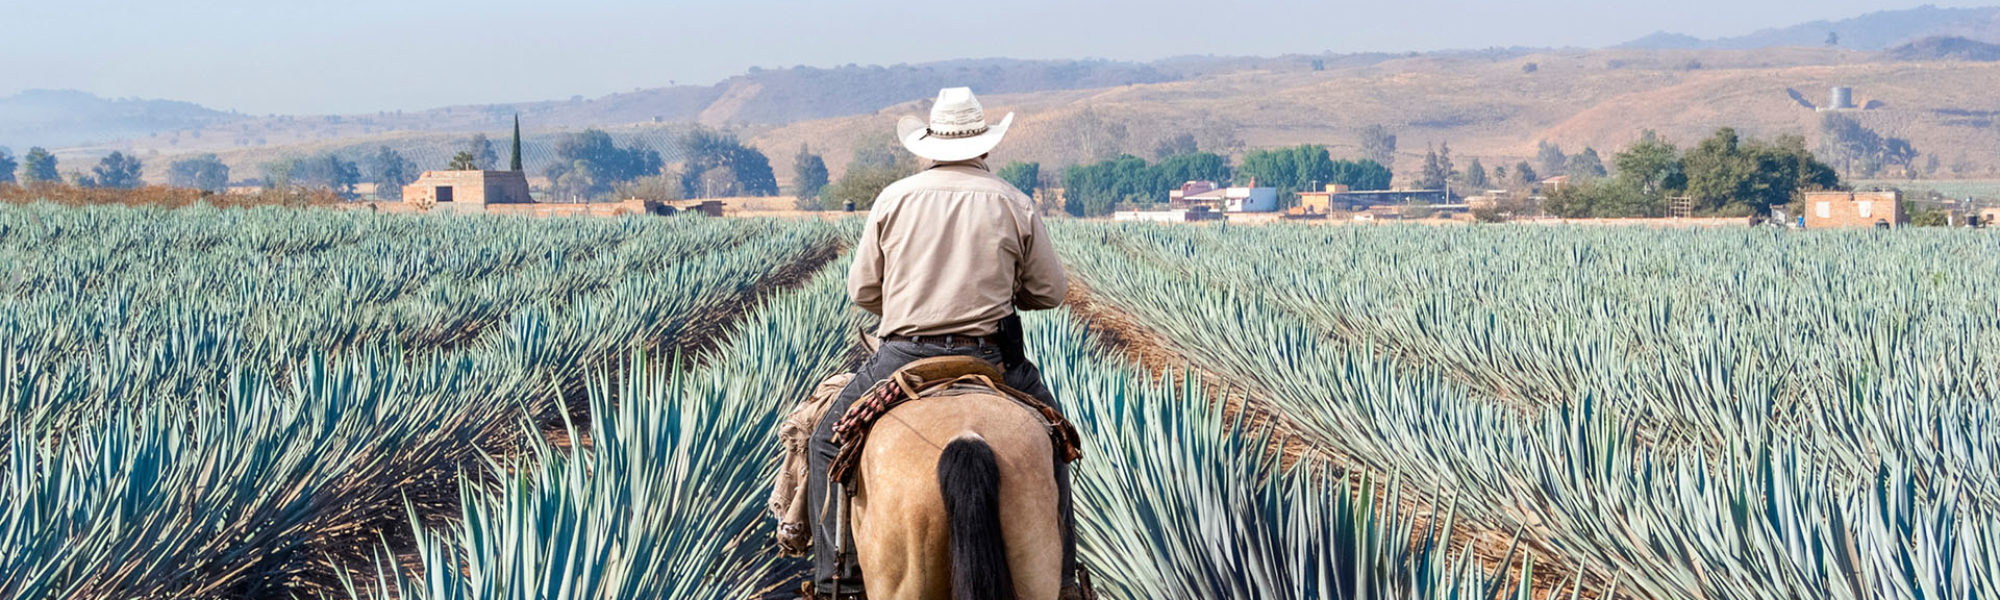 Farmer on his horse taking a tour of his Agave plants in Tequila, Jalisco, Mexico during a Jaya Travel & Tours' tour.